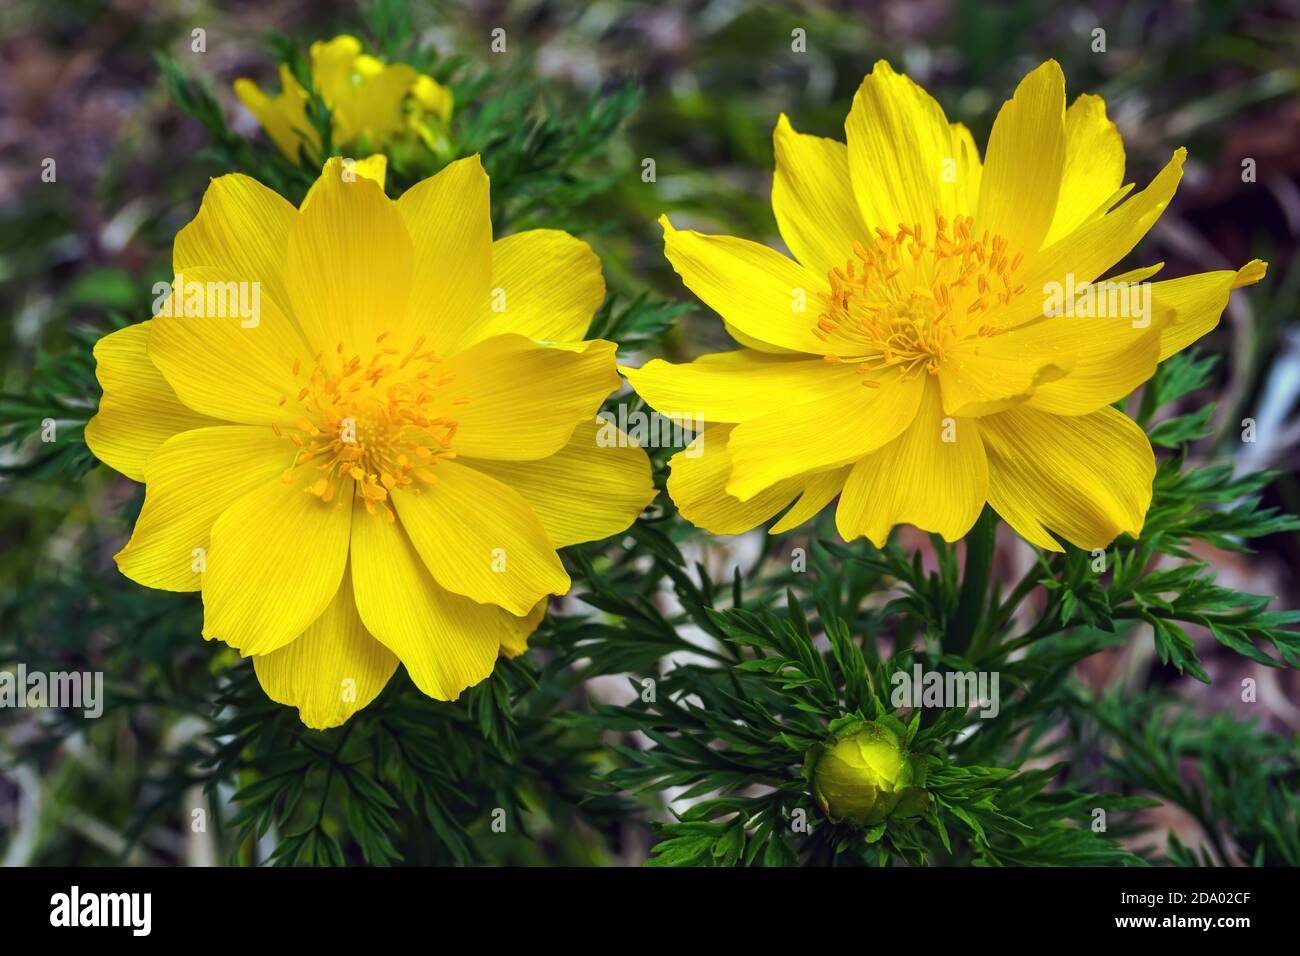 Top view of flowers Adonis vernalis, known as pheasant's eye, spring pheasant's eye, yellow pheasant's eye Stock Photo